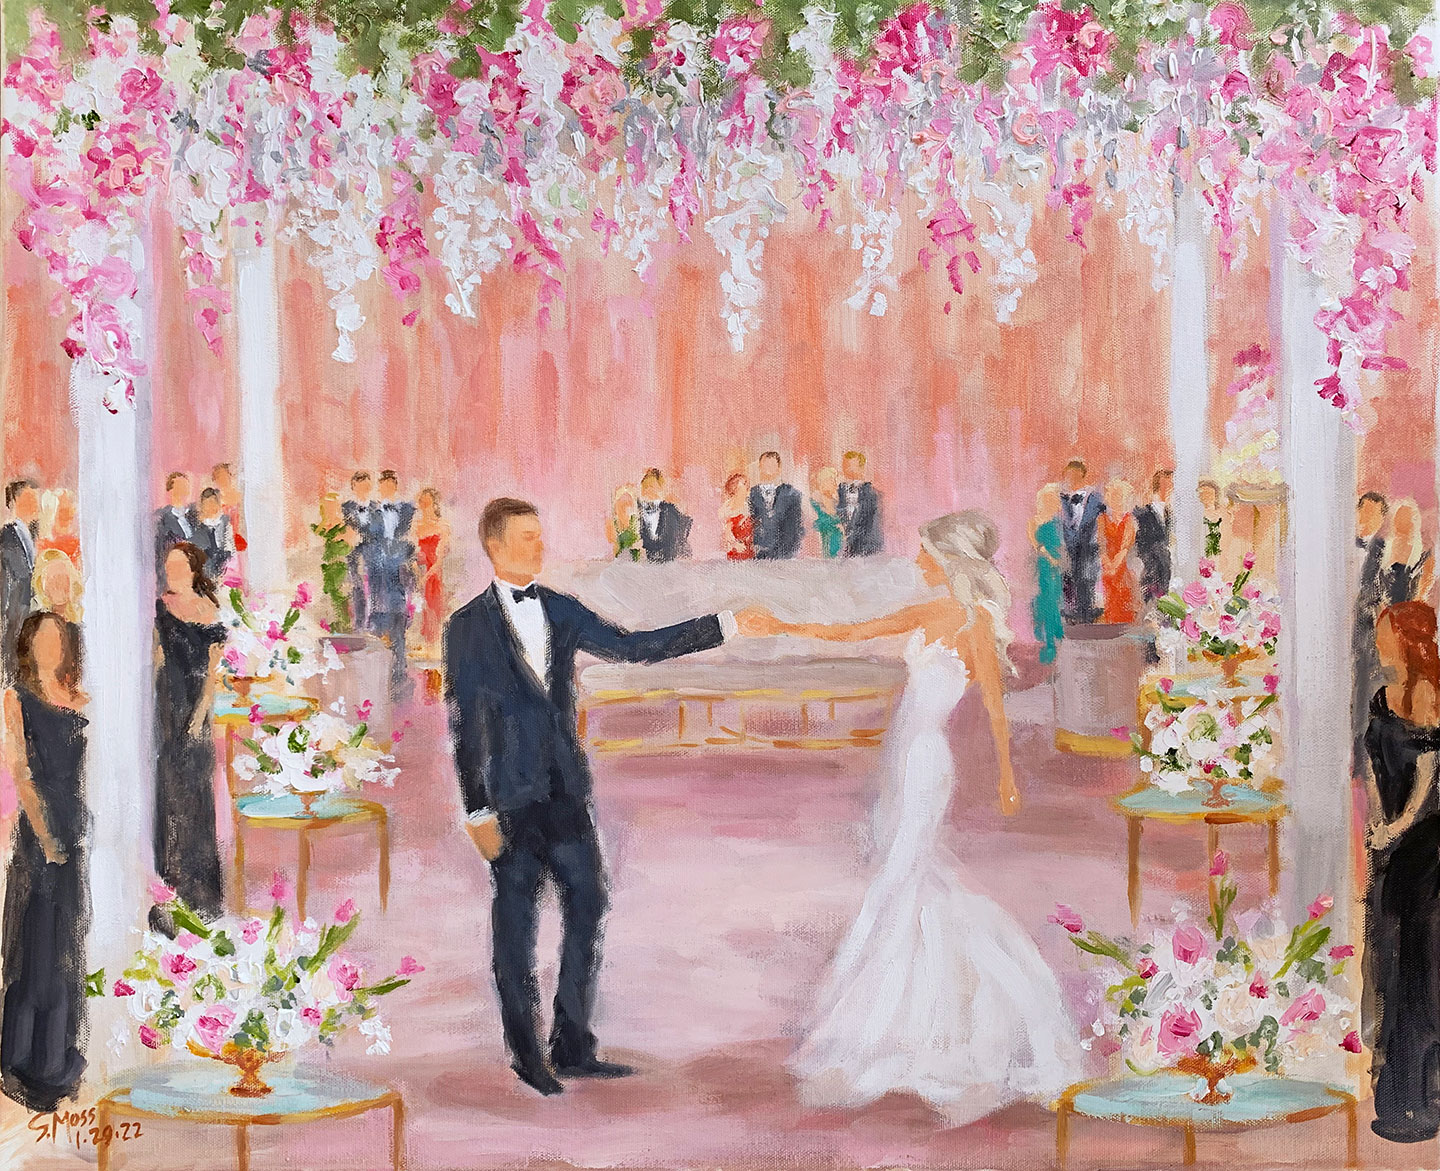 First Dance painting at Wedding Reception.  The Joule, Dallas, Texas by Susan Moss Cooper